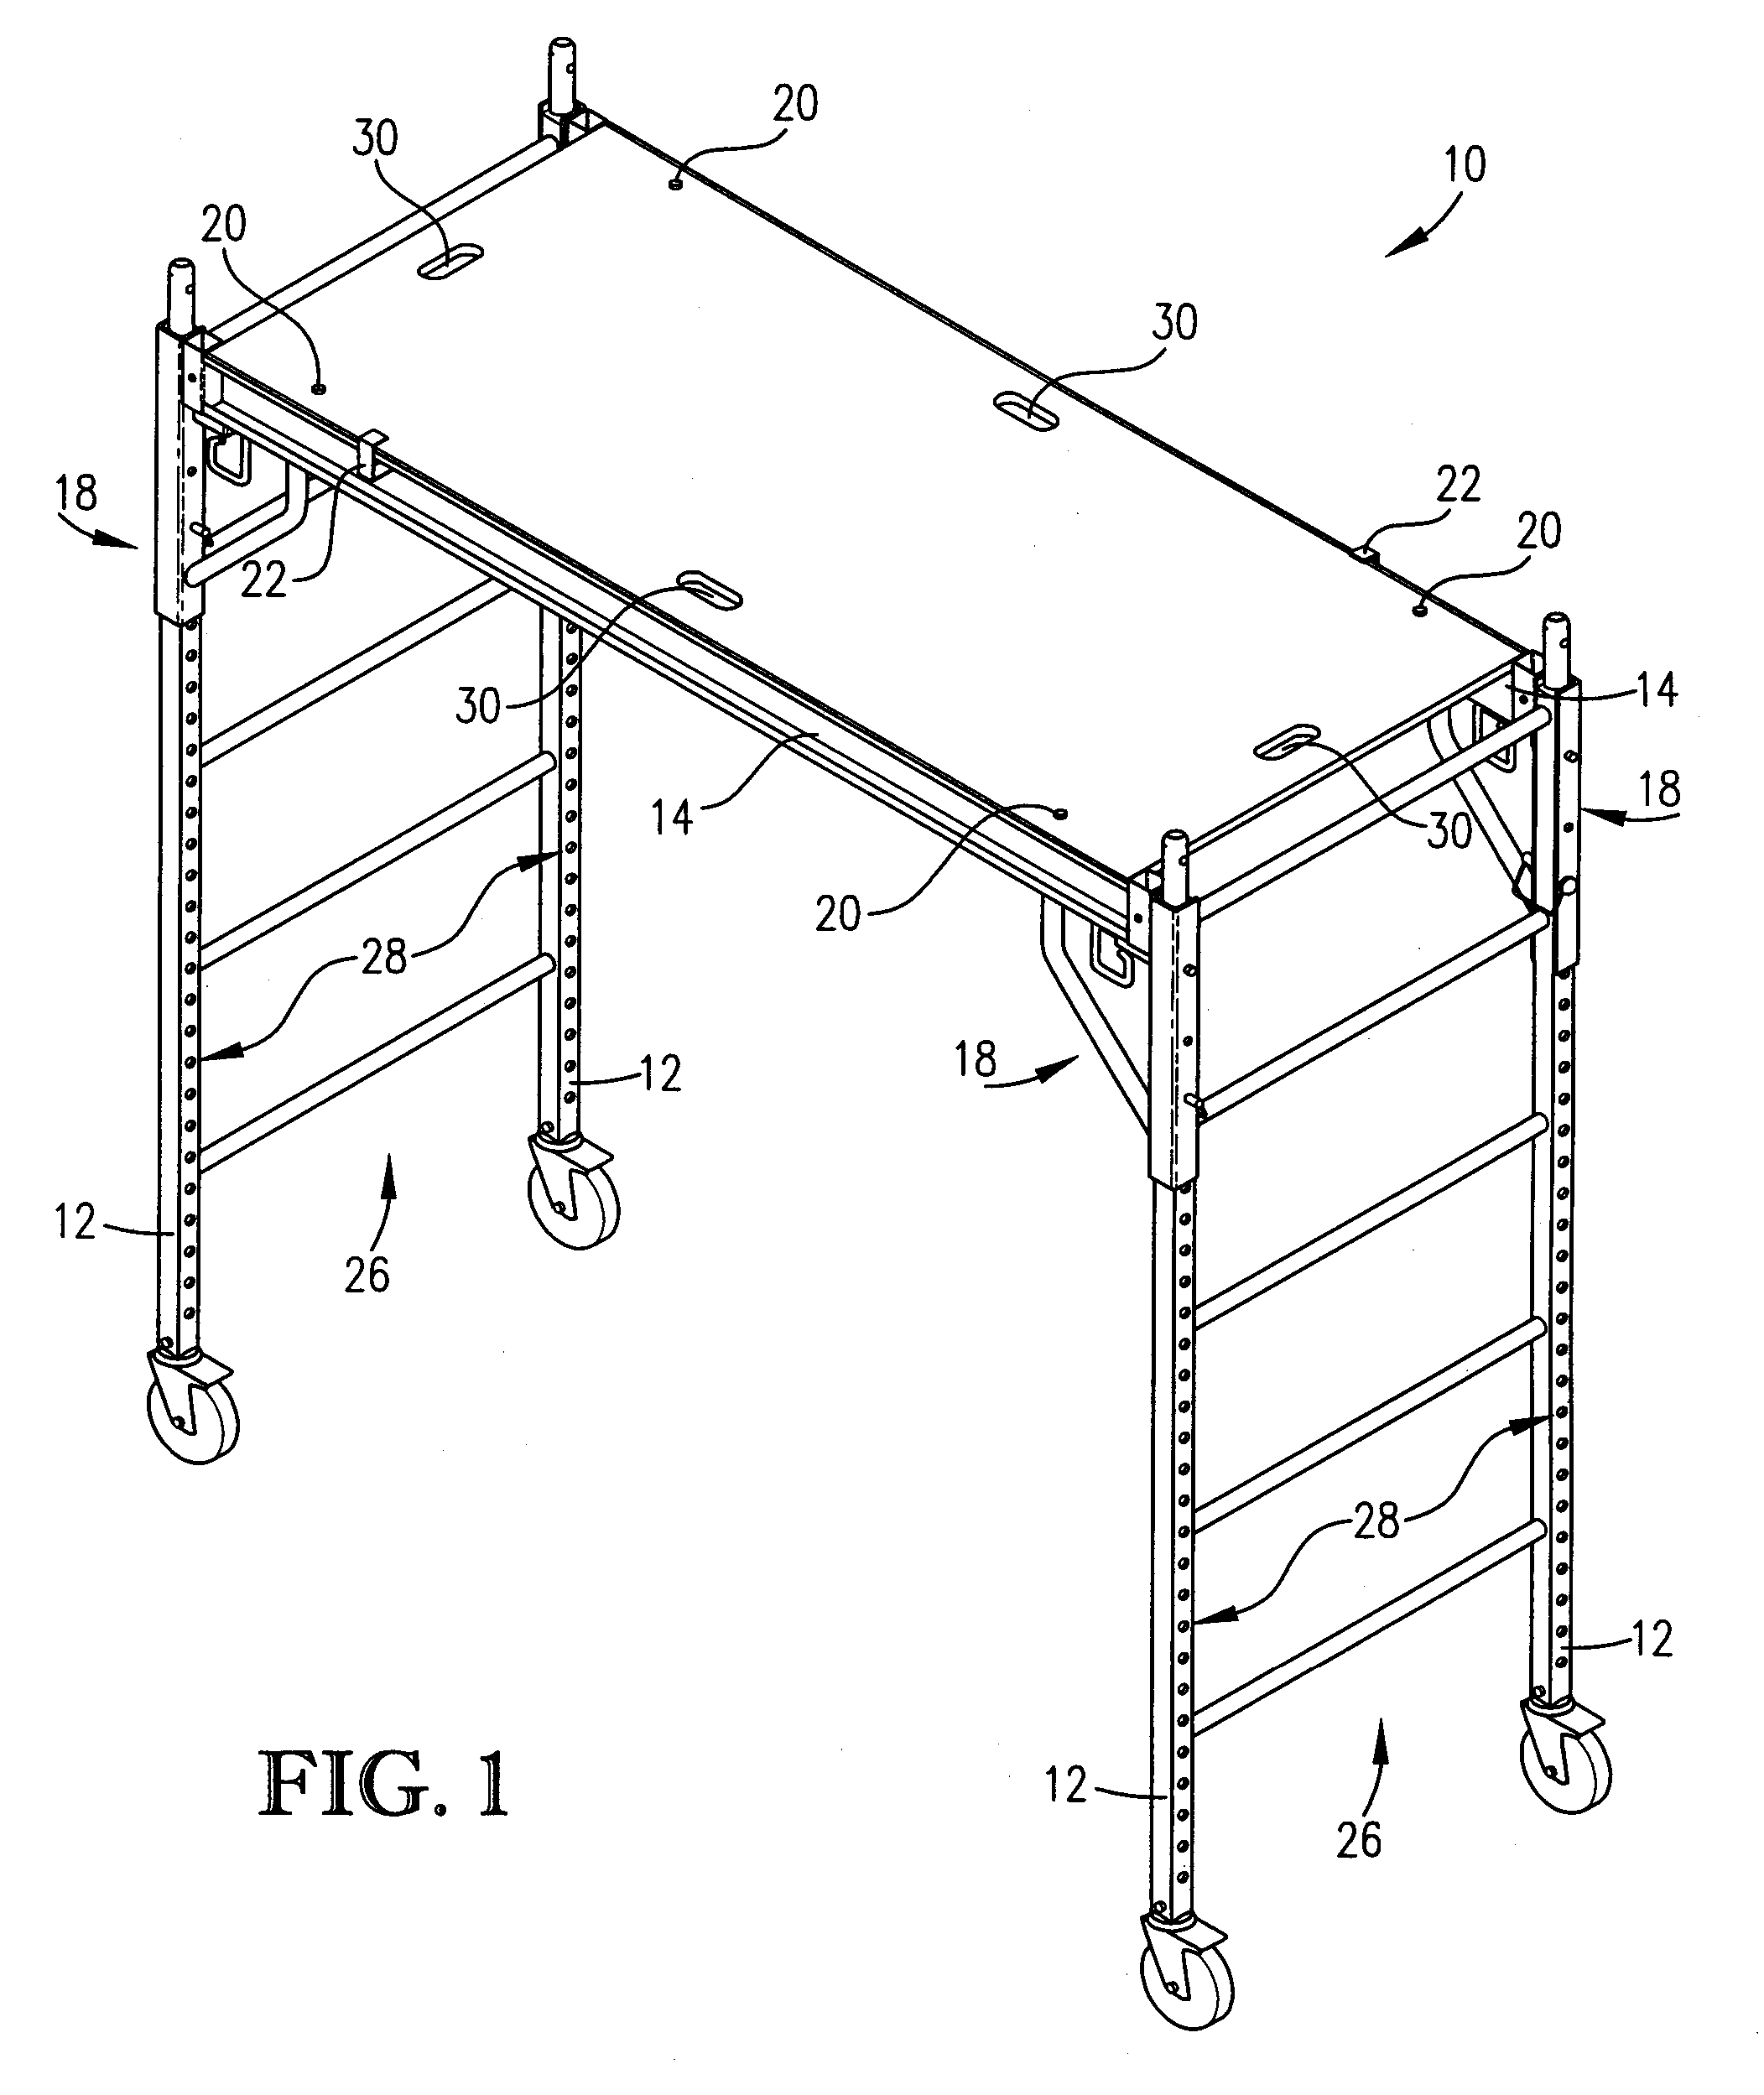 Utility scaffolding having safety features